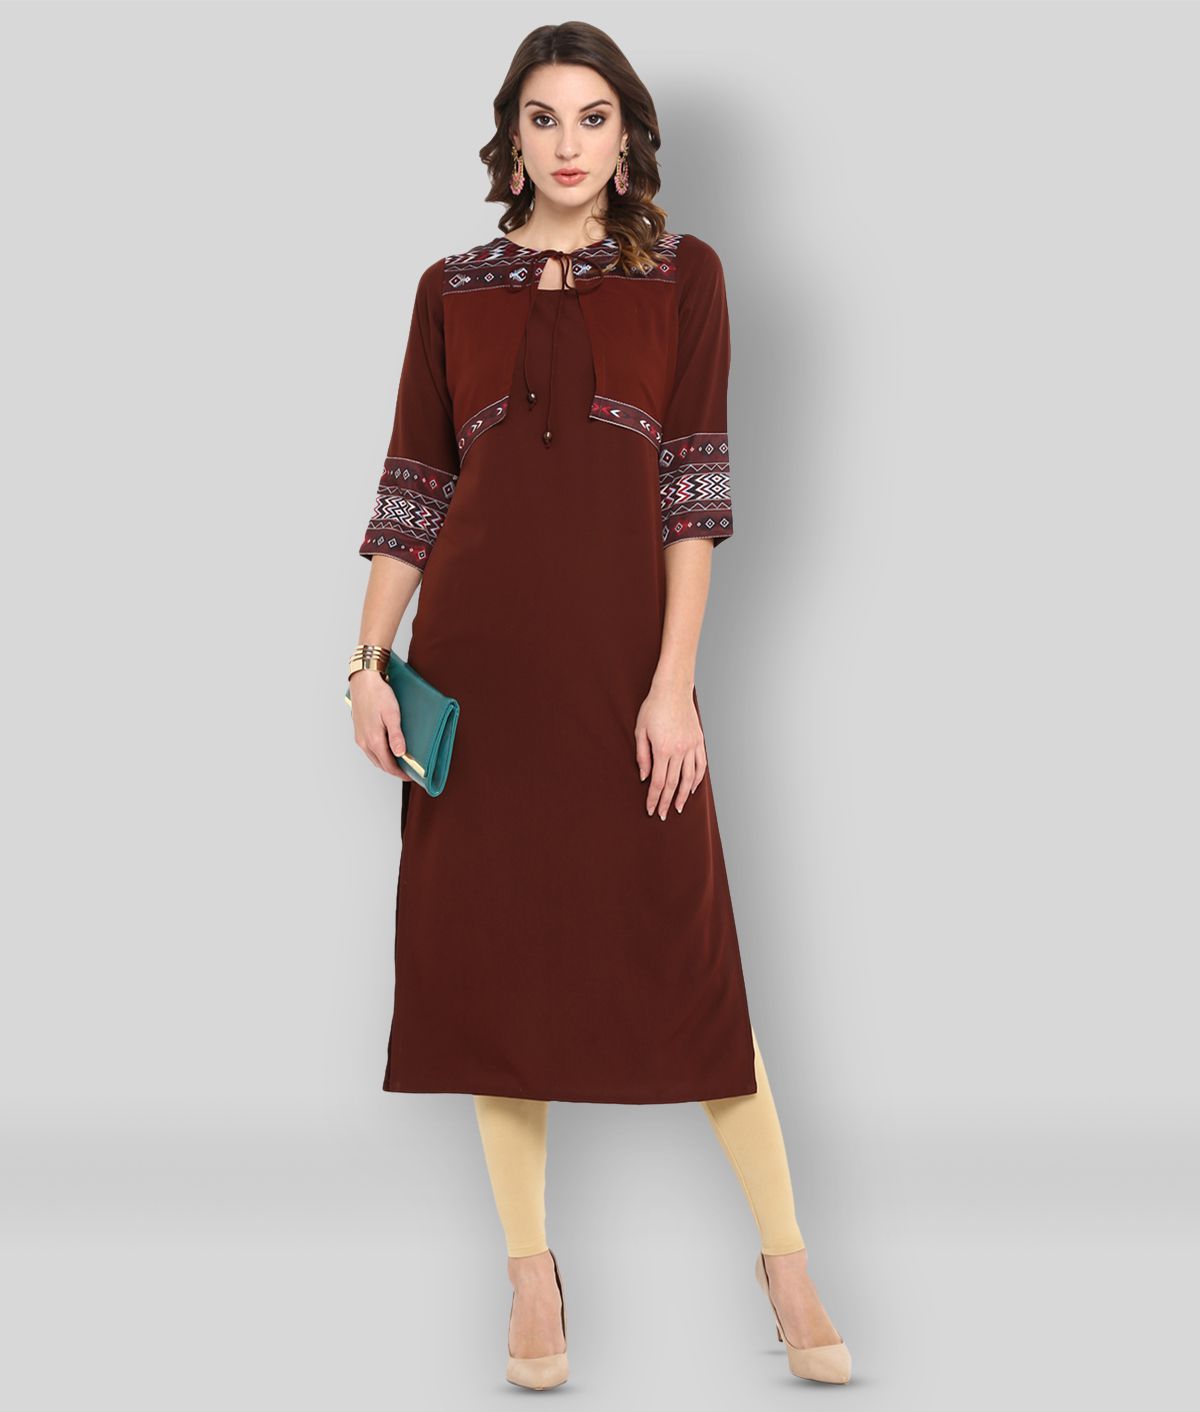 Span Multicolor Cotton Jacket Style Kurti  Buy Span Multicolor Cotton  Jacket Style Kurti Online at Best Prices in India on Snapdeal